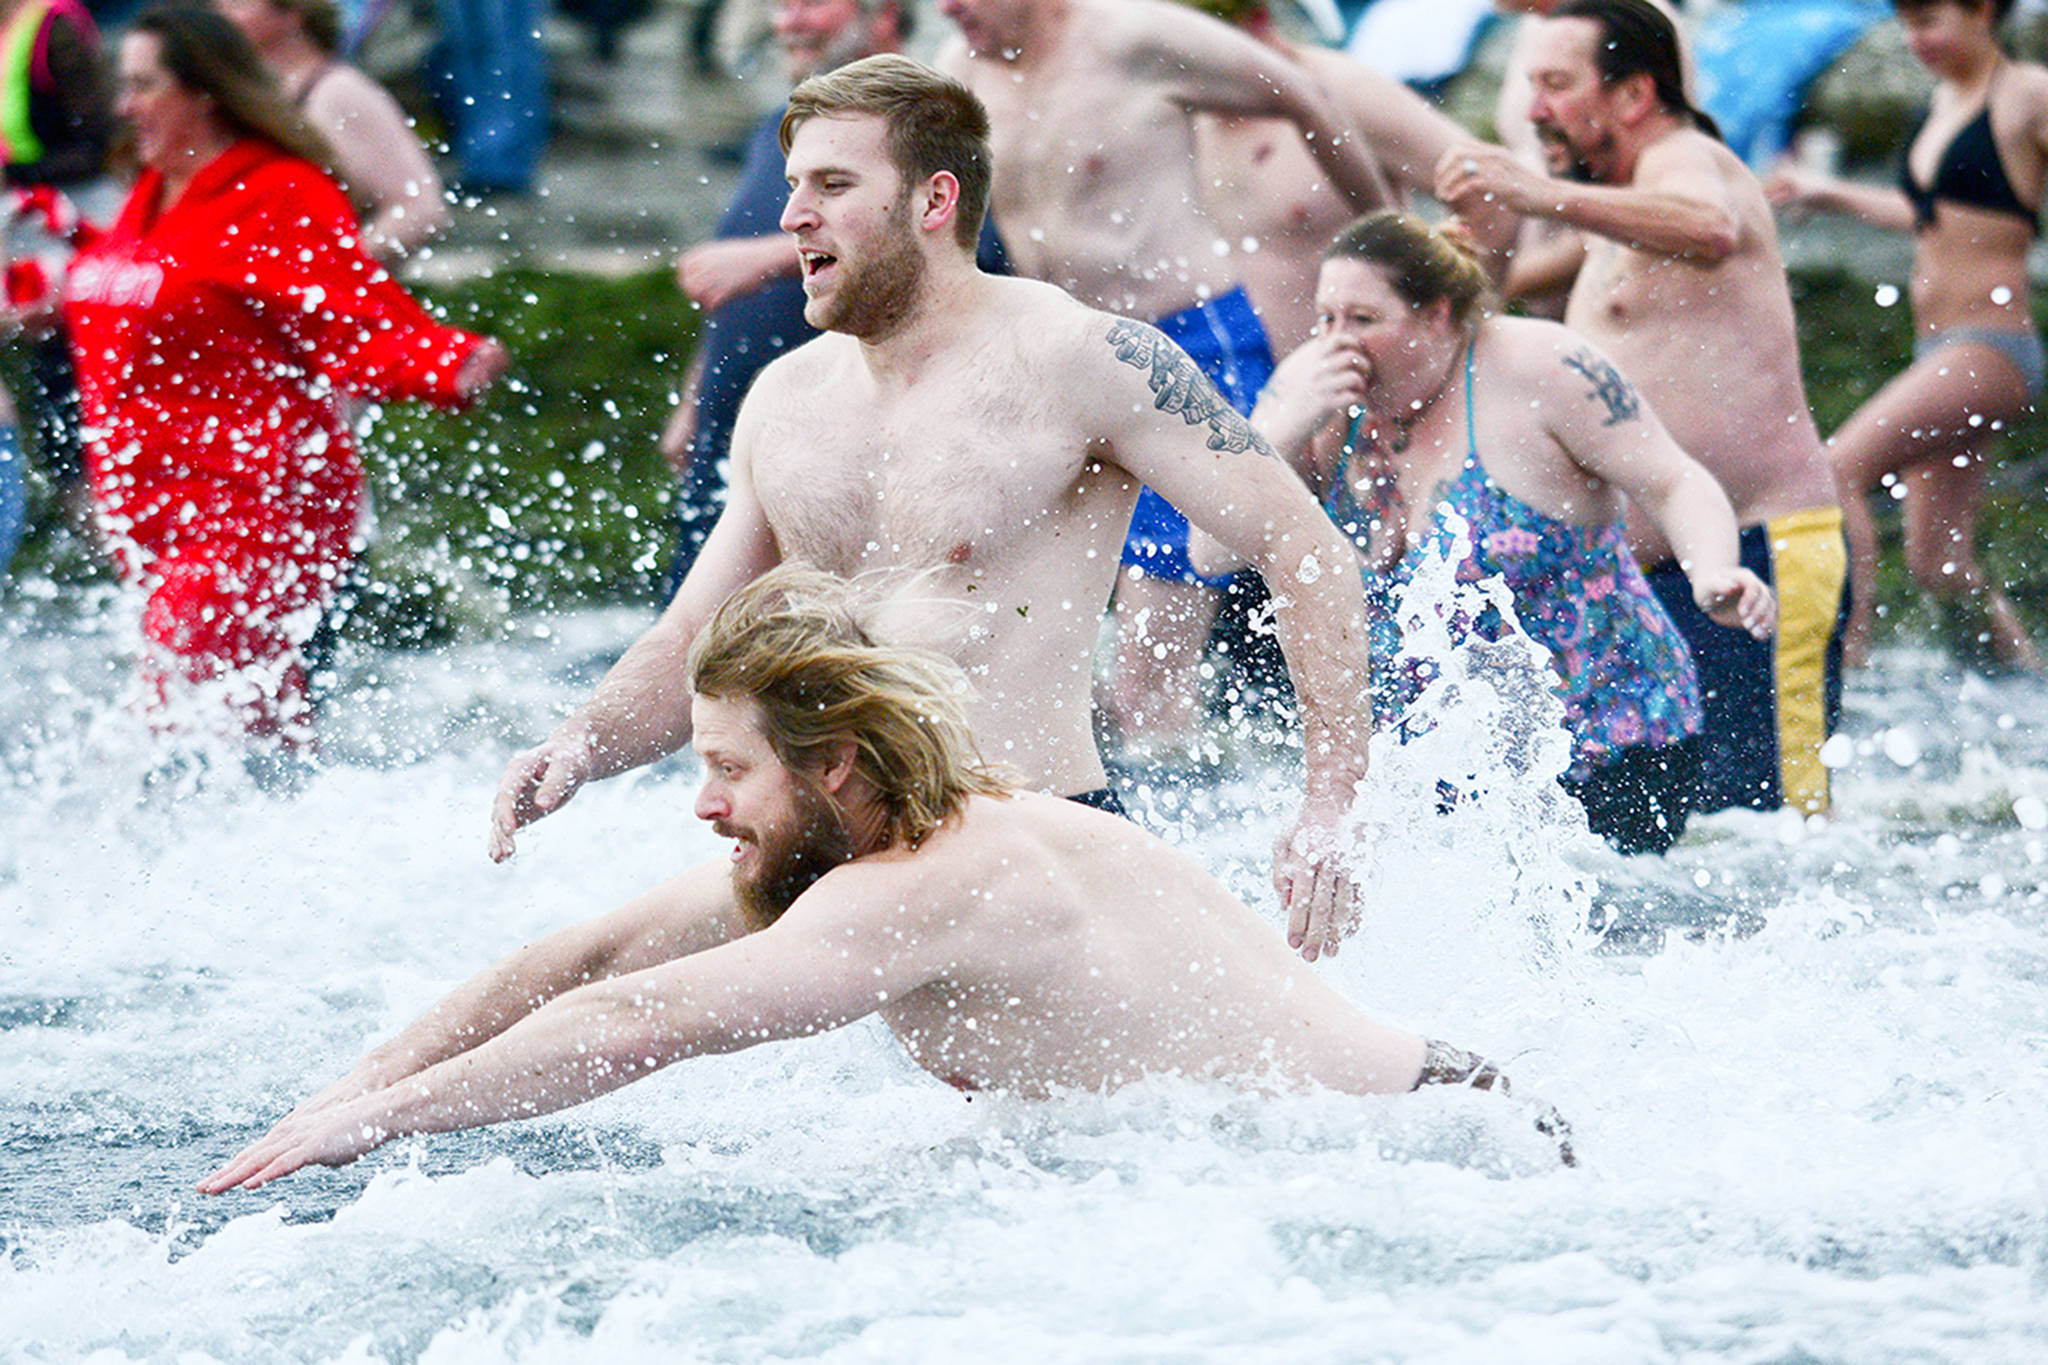 150 take bone-chilling swim to welcome new year in Port Angeles